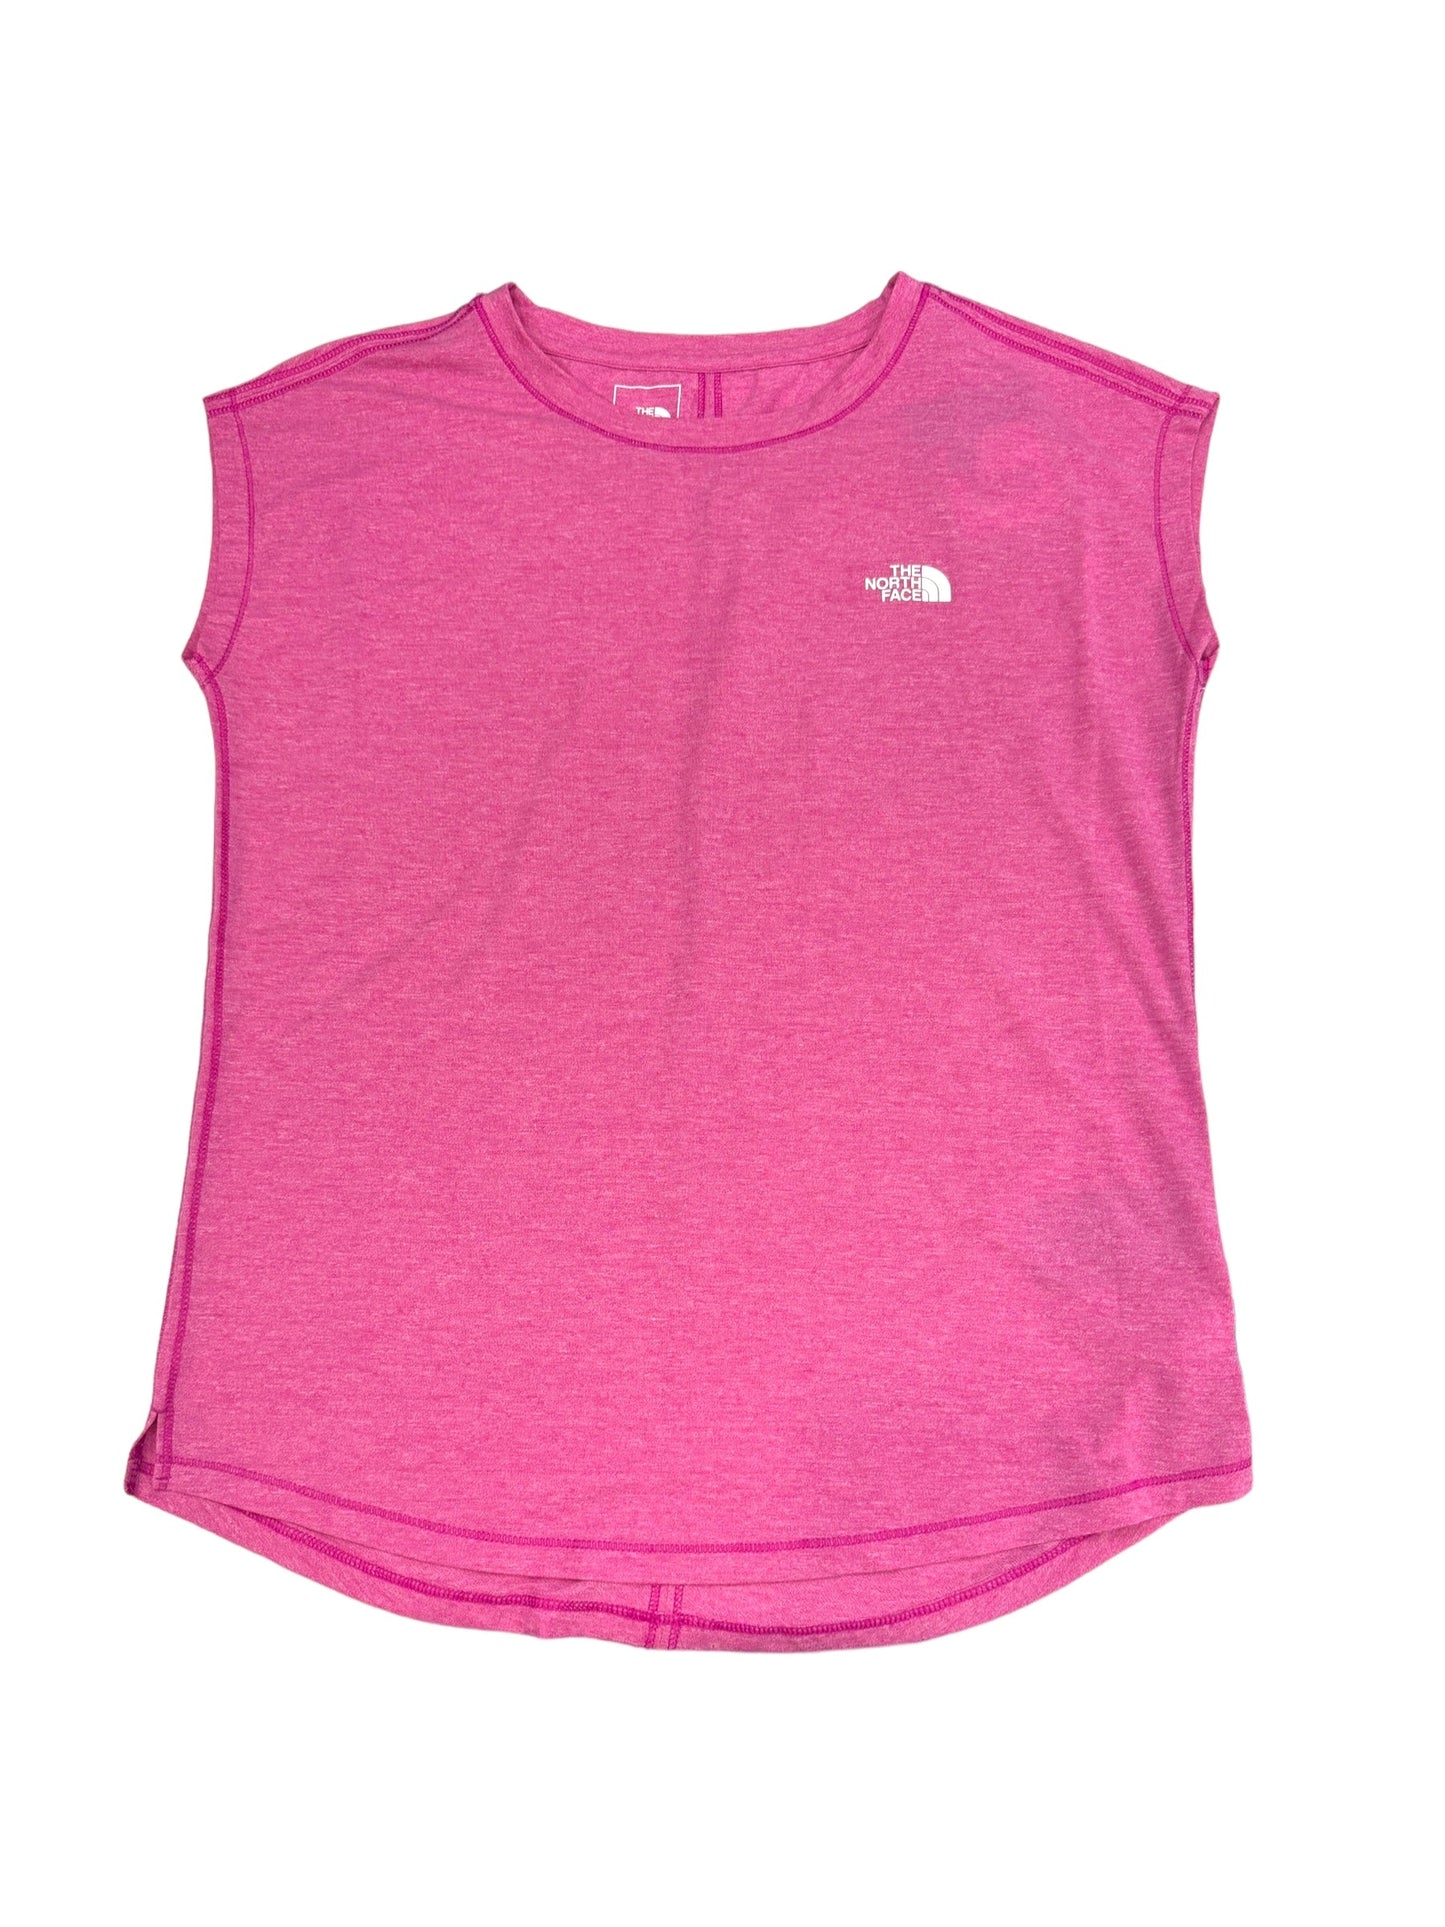 Pink Athletic Top Short Sleeve The North Face, Size Xs